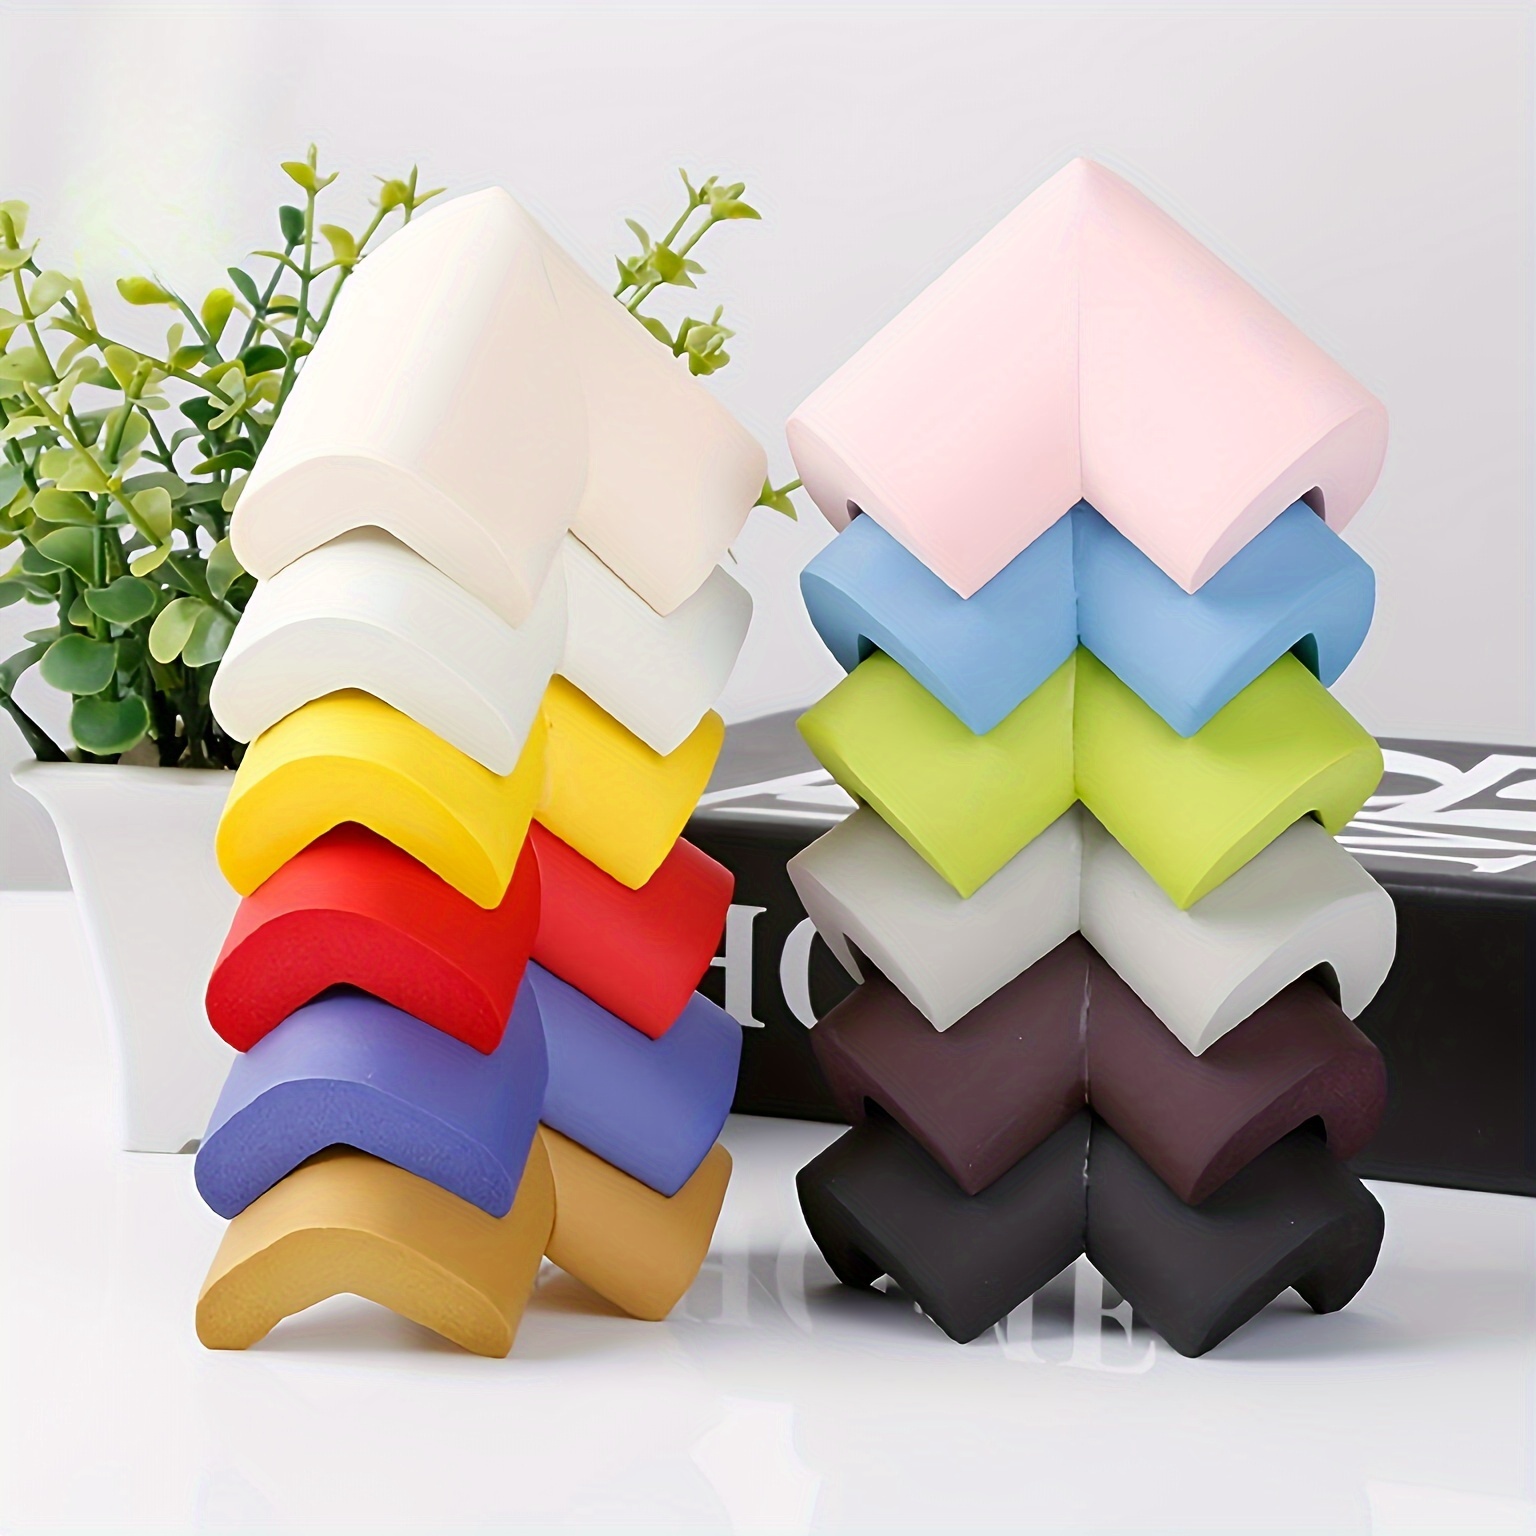 4pcs/pack Cartoon Dog Shaped Silicone Anti-collision Table Corner Protector  For Child Safety, Coffee Table, Desk Edge Cover